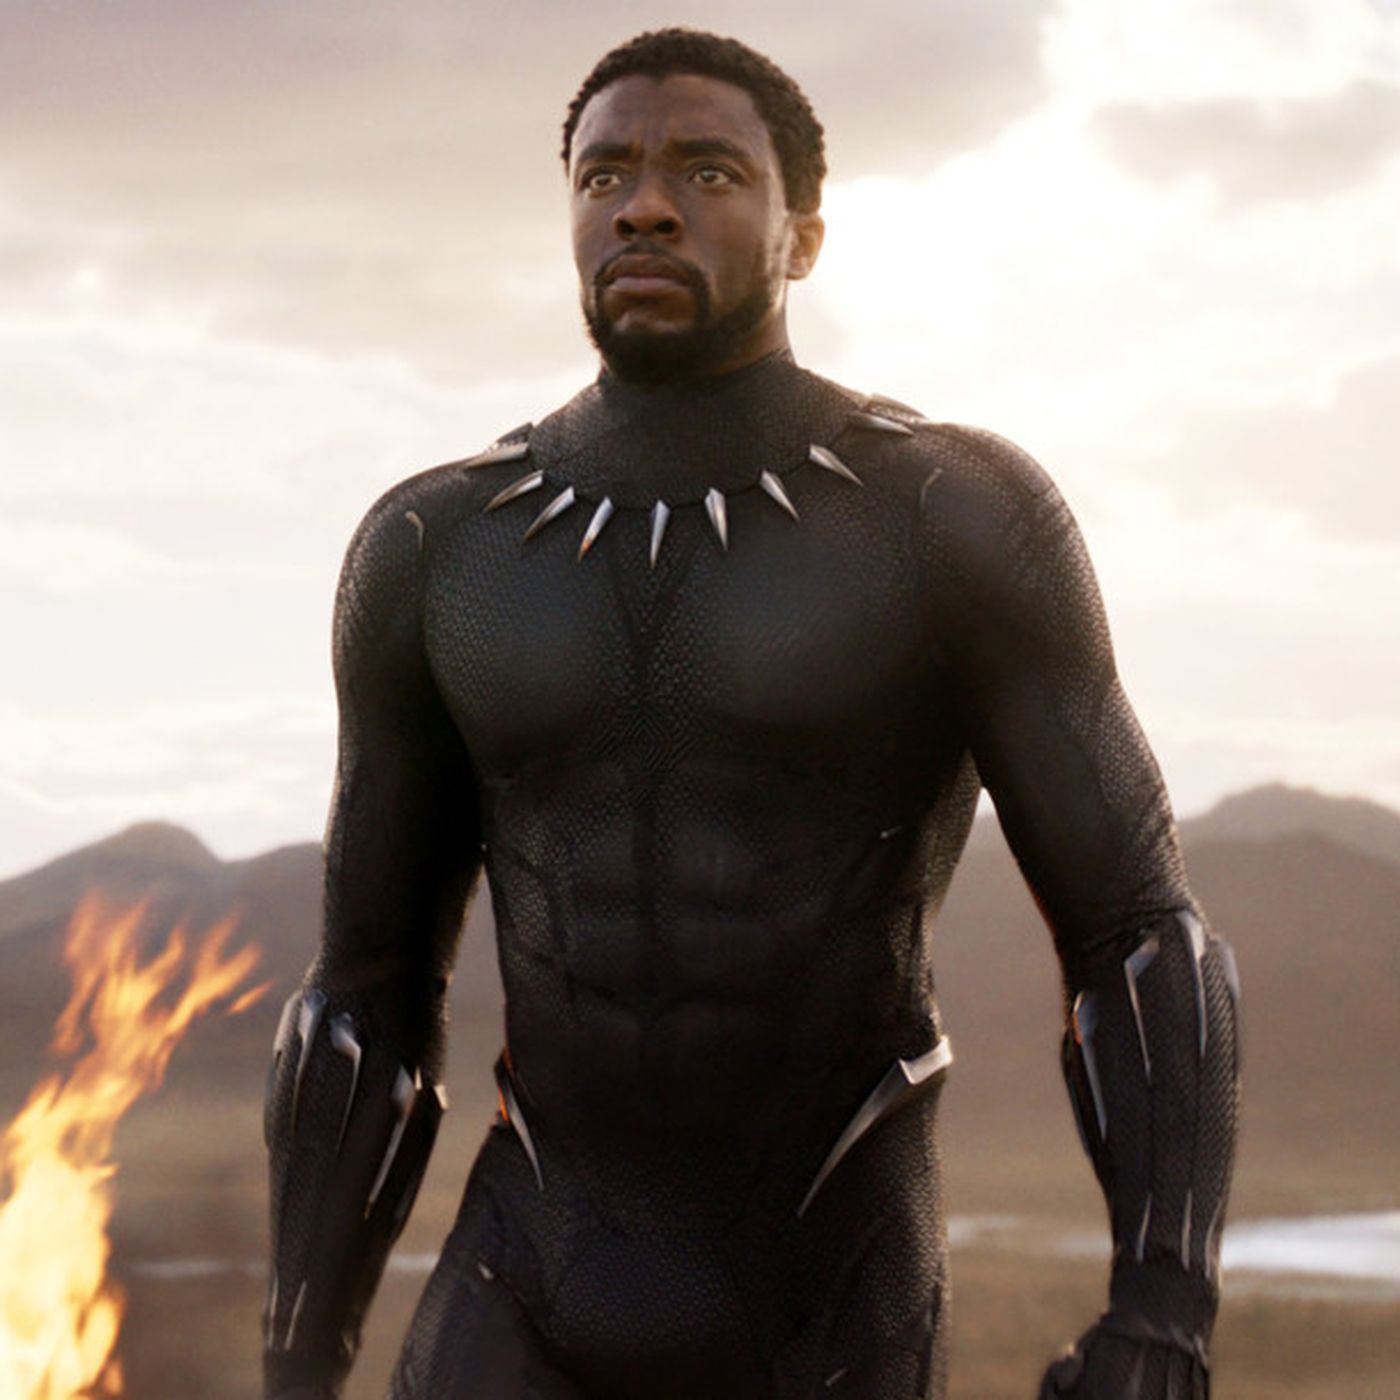 Black Panther Star Chadwick Boseman Succumbs To Colon Cancer, Passes Away At 43 